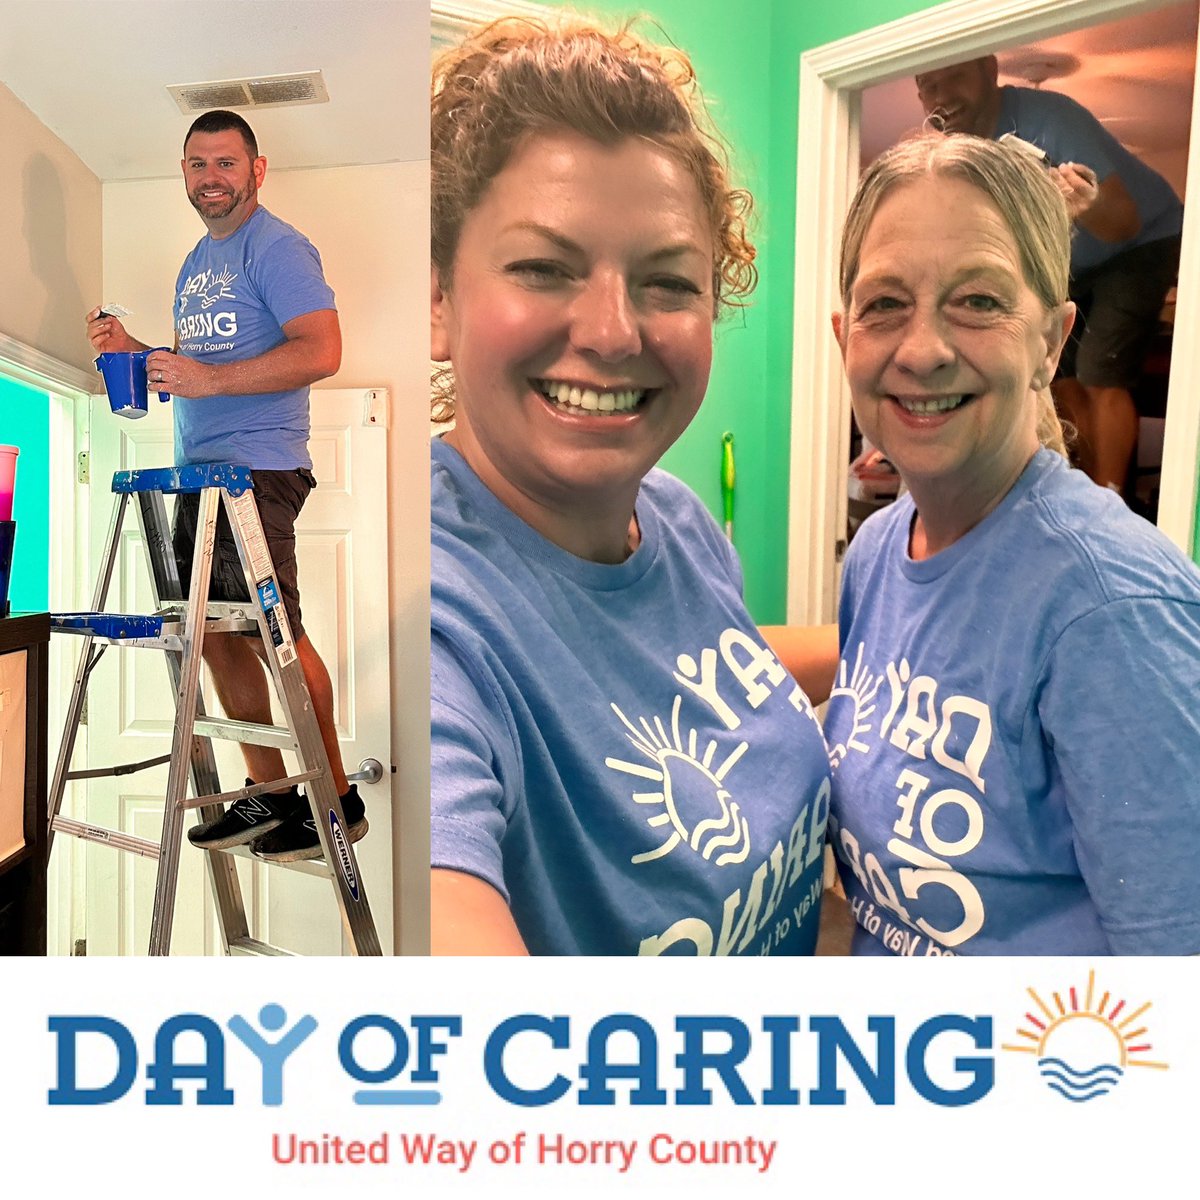 @MBAChamber team came together today to participate in the @UnitedWayHorry #DayofCaring painting one of the shelter rooms for @NewDirectionsMB ❤️ #WeAreTheBeach